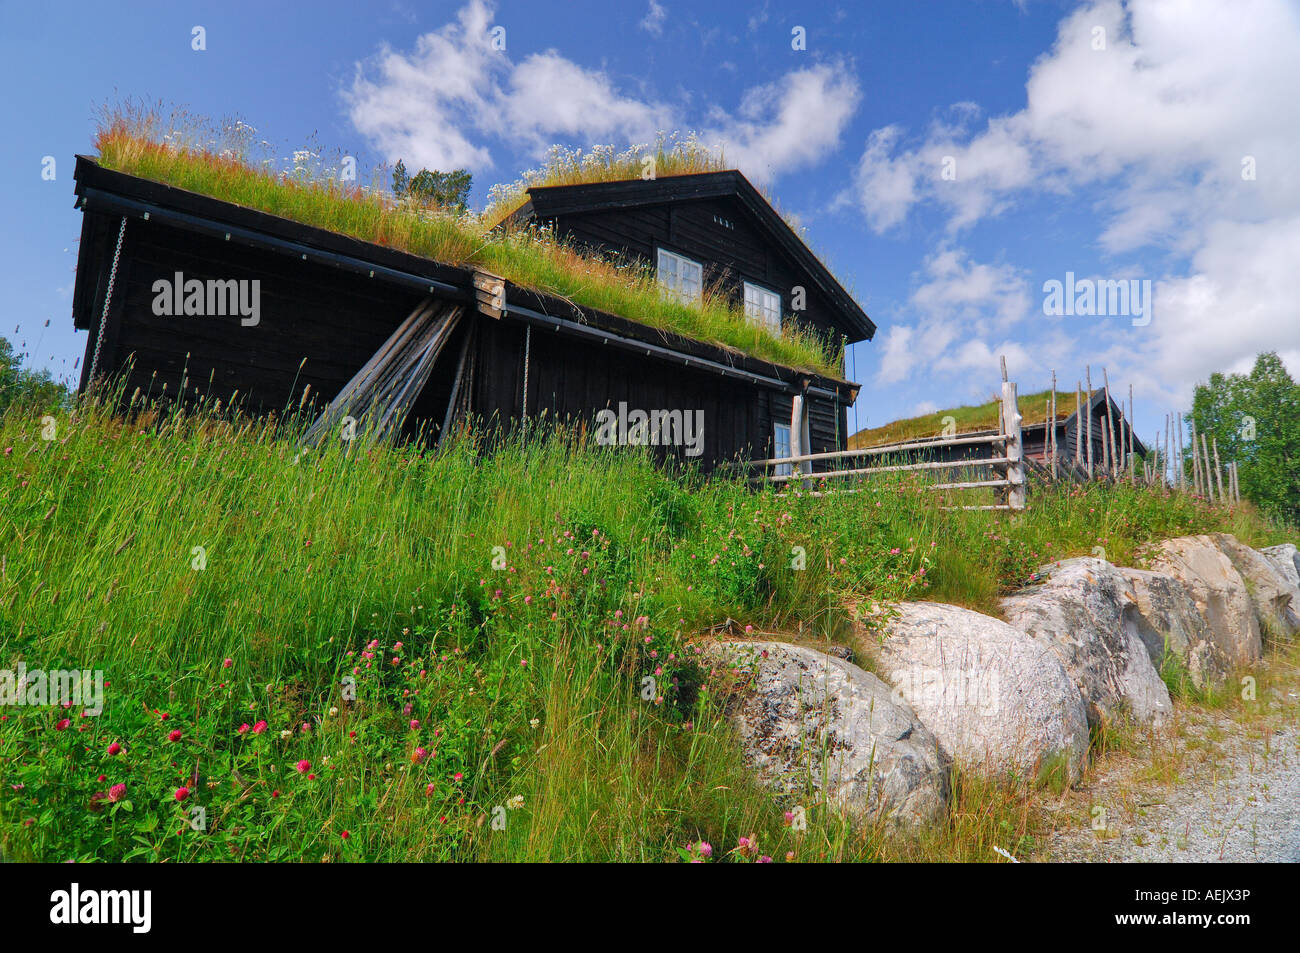 Holiday home with grass on the roof, Gausdal, Oppland, Norway, Scandinavia, Europe Stock Photo